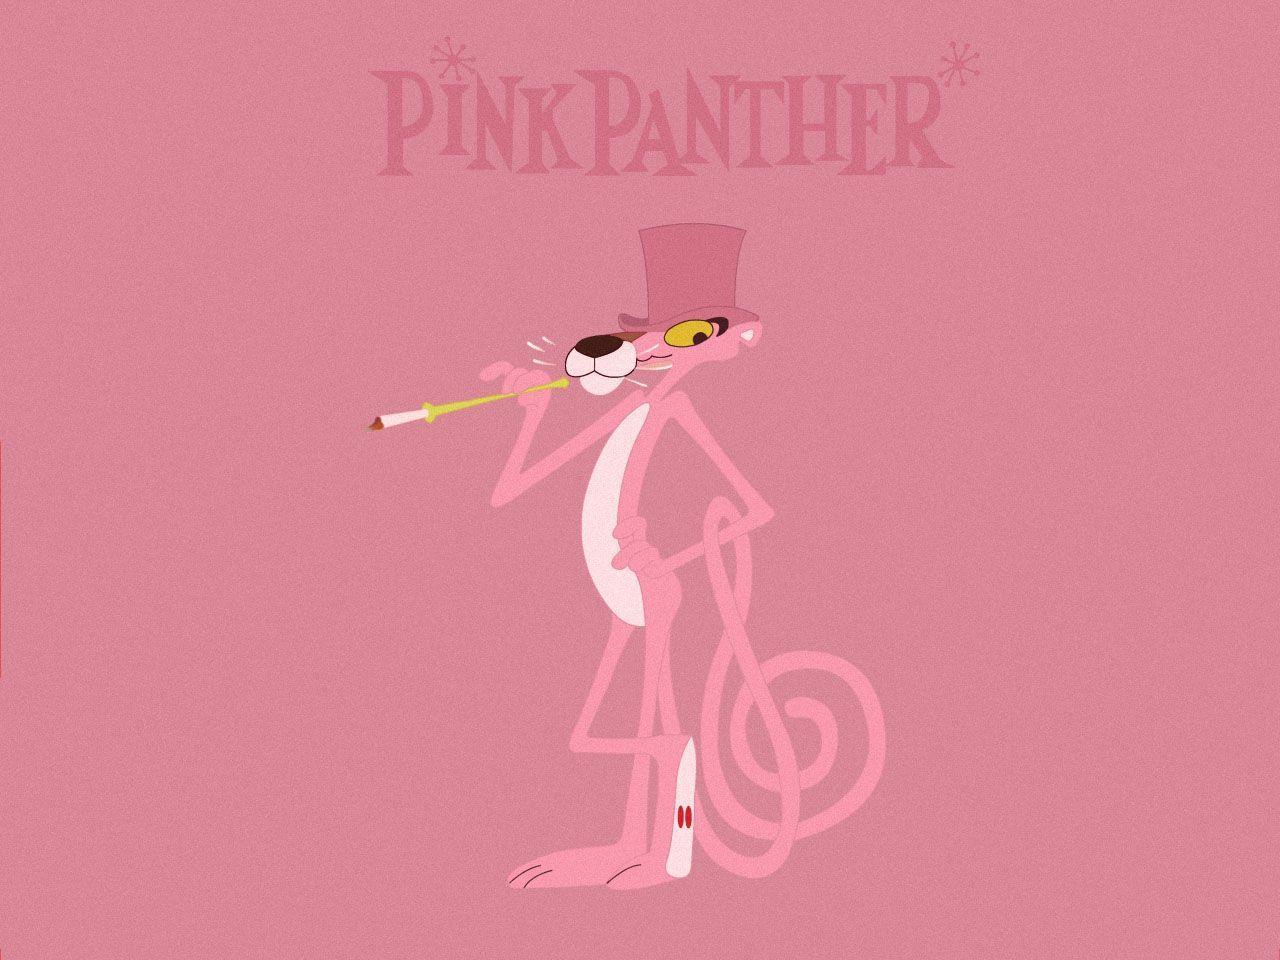 More Like Pink Panther Tribute